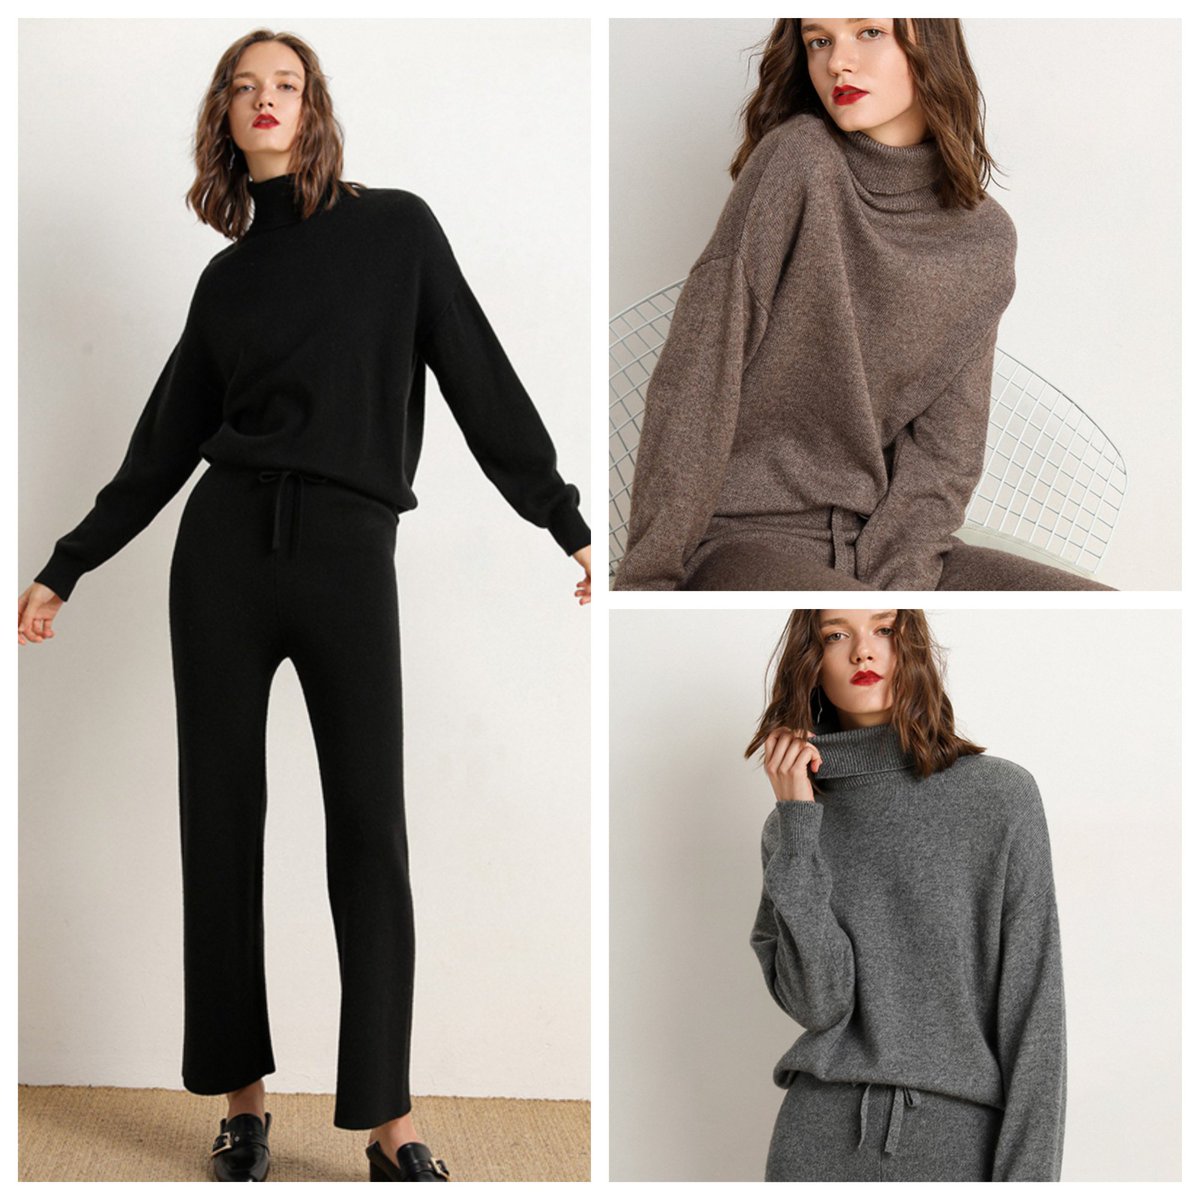 In autumn and winter, wear warm and comfortable cashmere suits! #cashmere #sweaterweather #Autumnvibes #OOTD #selfcare #womenfashion #ootdstyles #comfort #ootdideas #outfitideasforyou #comfortablestyle